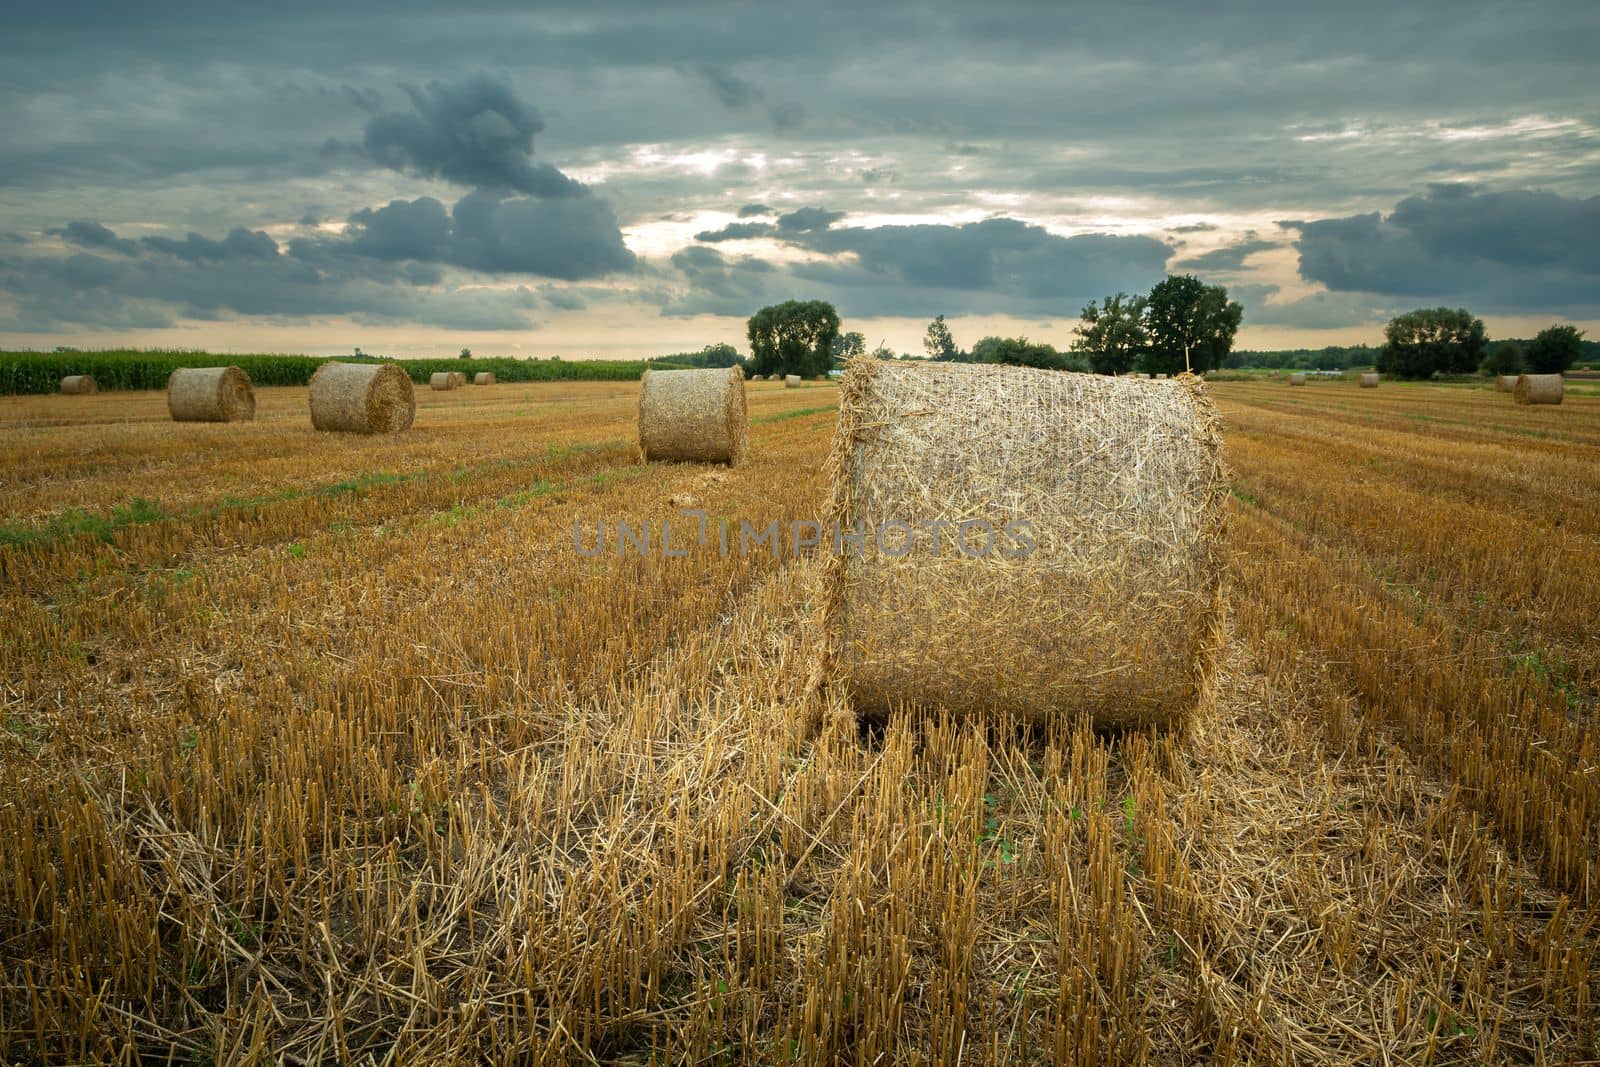 Round straw bales in the field and cloudy sky by darekb22